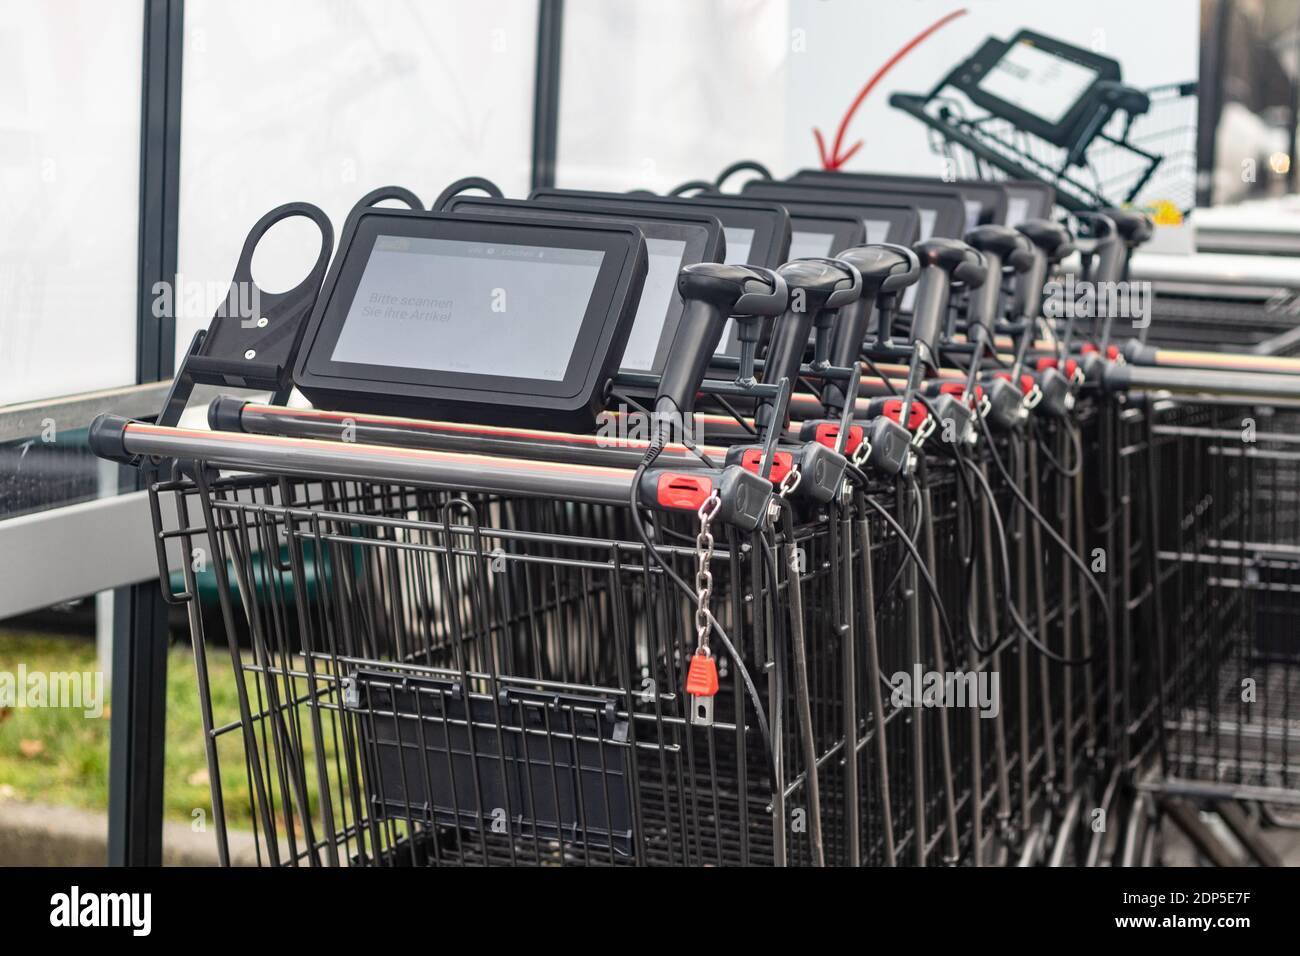 Shopping trolley with scanner system in a row Stock Photo - Alamy